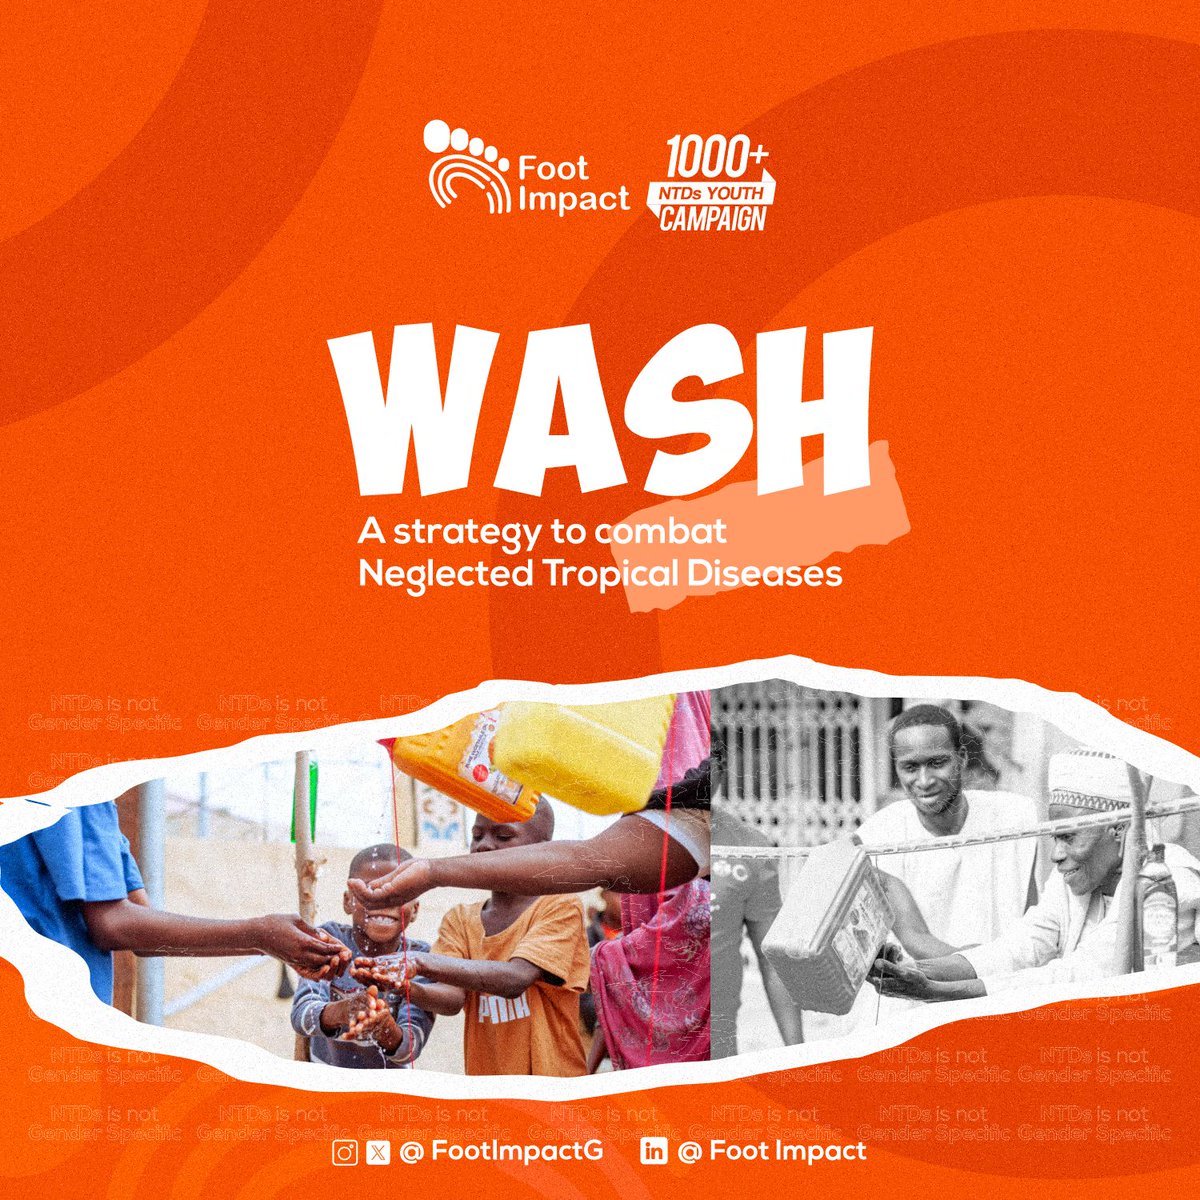 Did you know that poor water, #sanitation, and #hygiene (#WASH) conditions are major drivers of neglected tropical diseases (#NTDs)? linkedin.com/posts/footimpa… #leavenoonebehind #BeatNTDsNaija #BeatNTDs #100percentcommitted #YouthcombatingNTDs #1000plu #NTDsYouthcampaign #sdg17